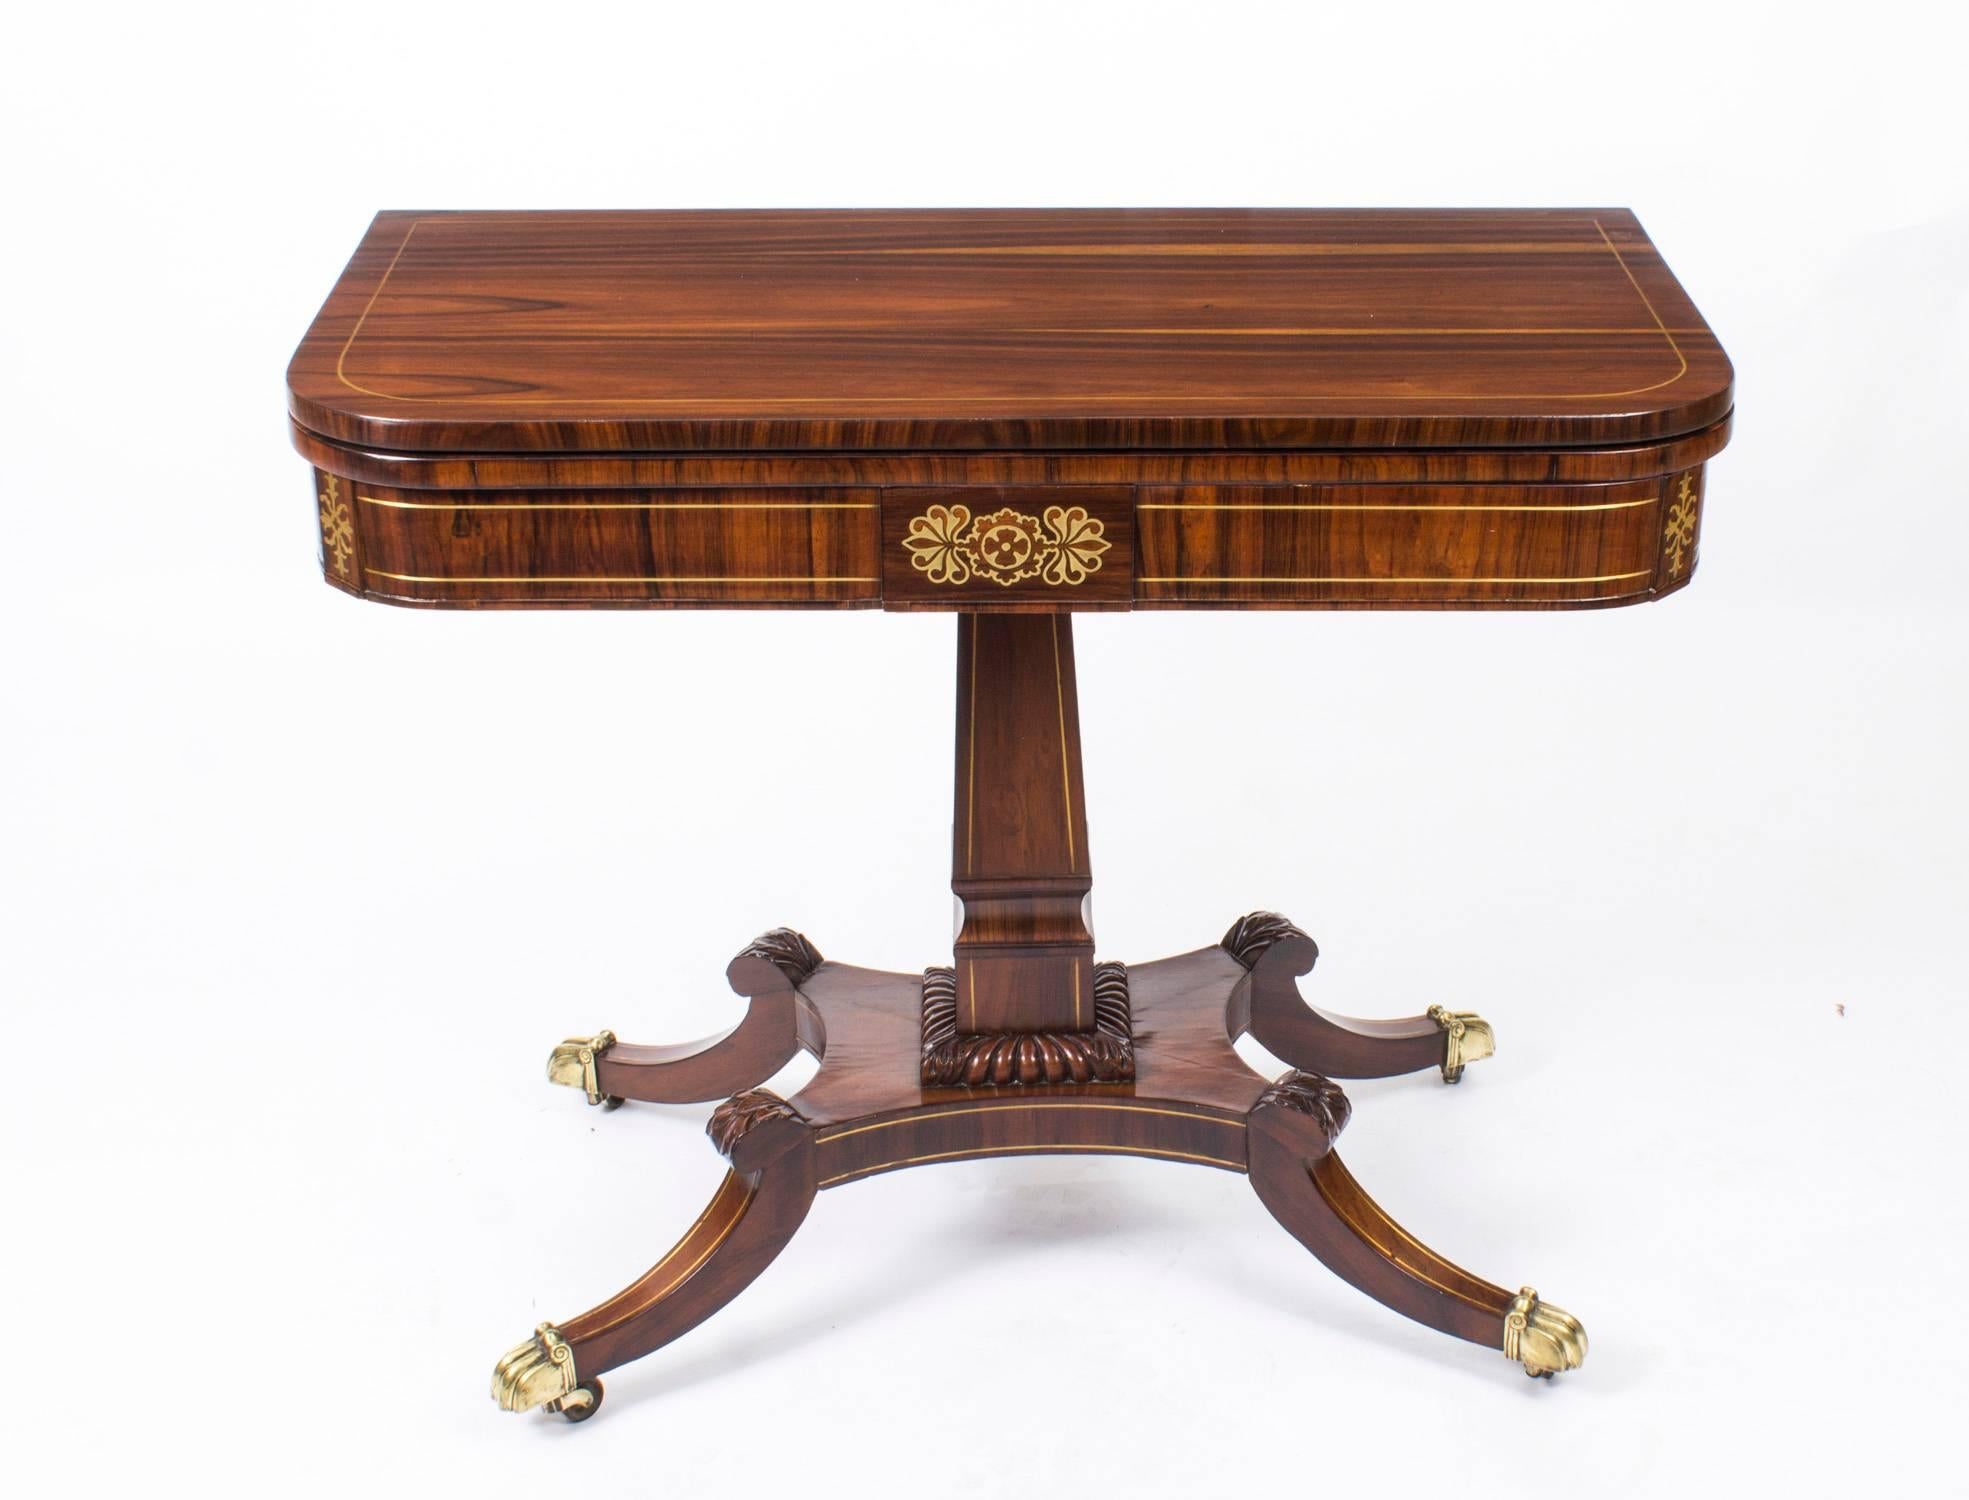 This is a very attractive antique English Regency coromandel and cut brass marquetry fold over card table, circa 1815 in date.

This rounded rectangular card table is made from beautiful coromandel, the folding top enclosing a baize lined green